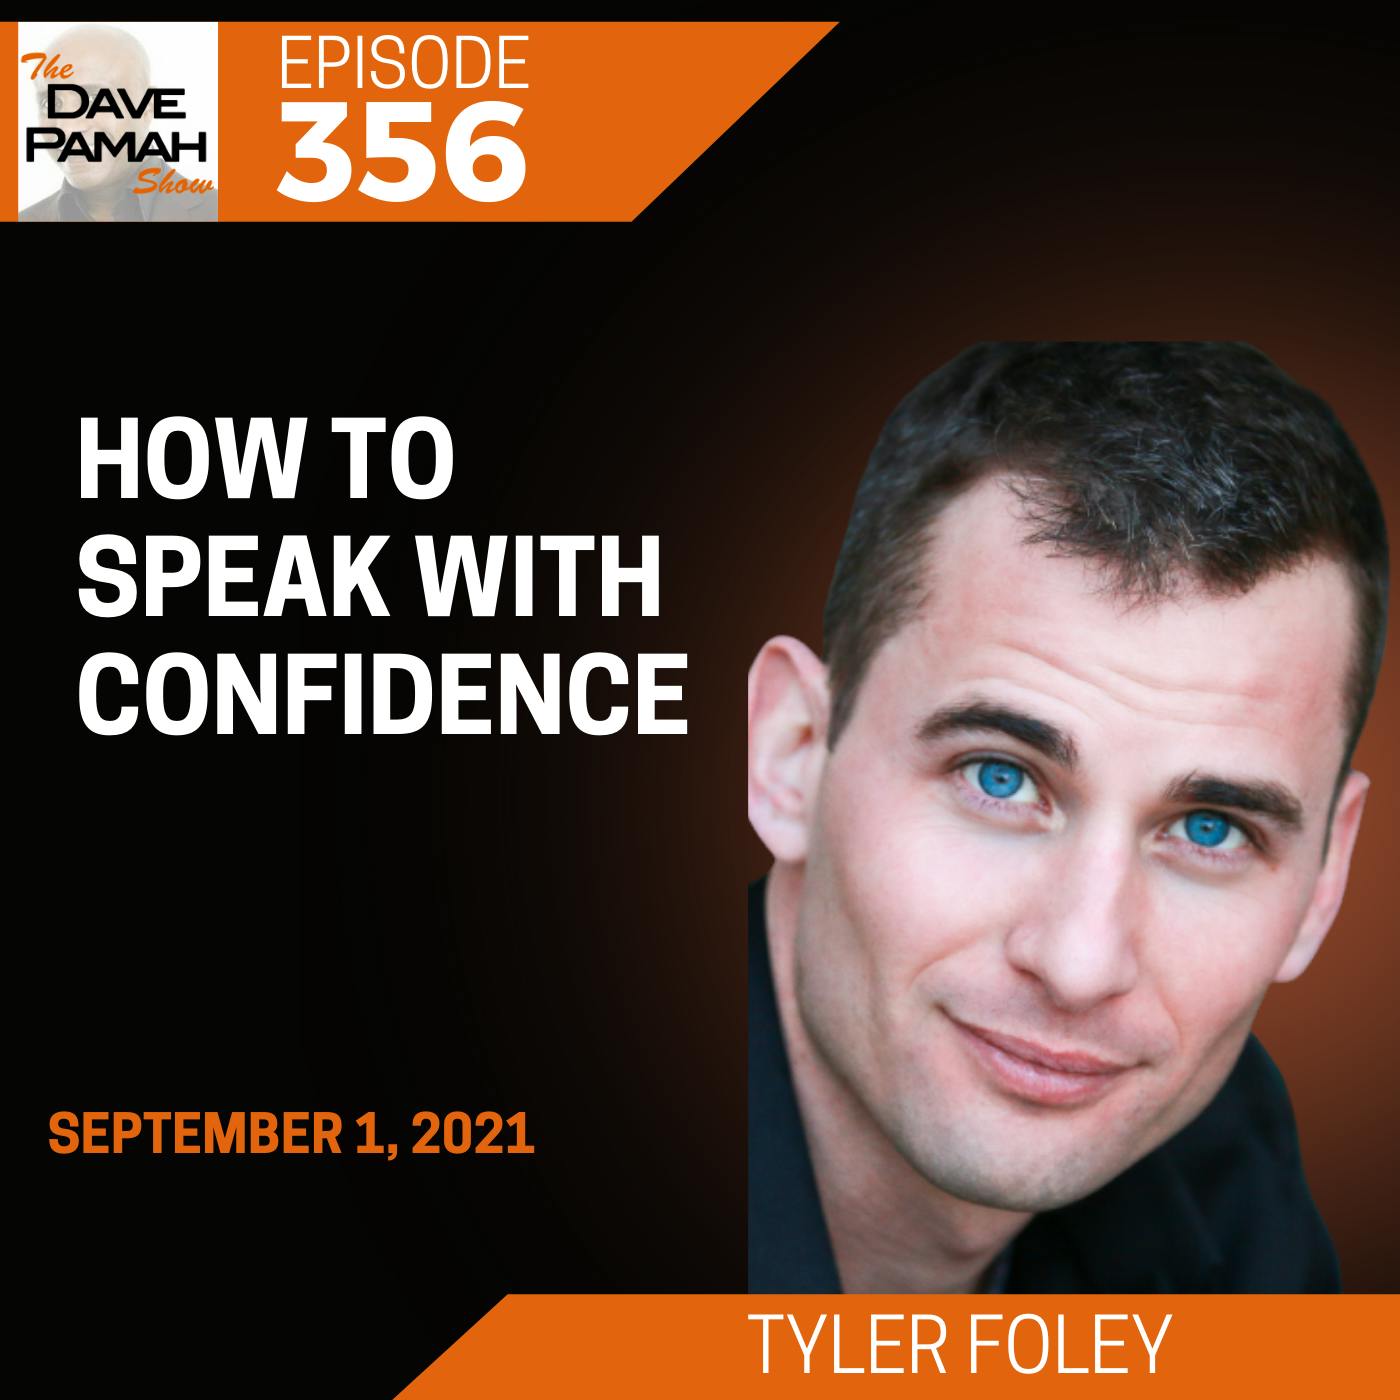 How to Speak With Confidence with Tyler Foley